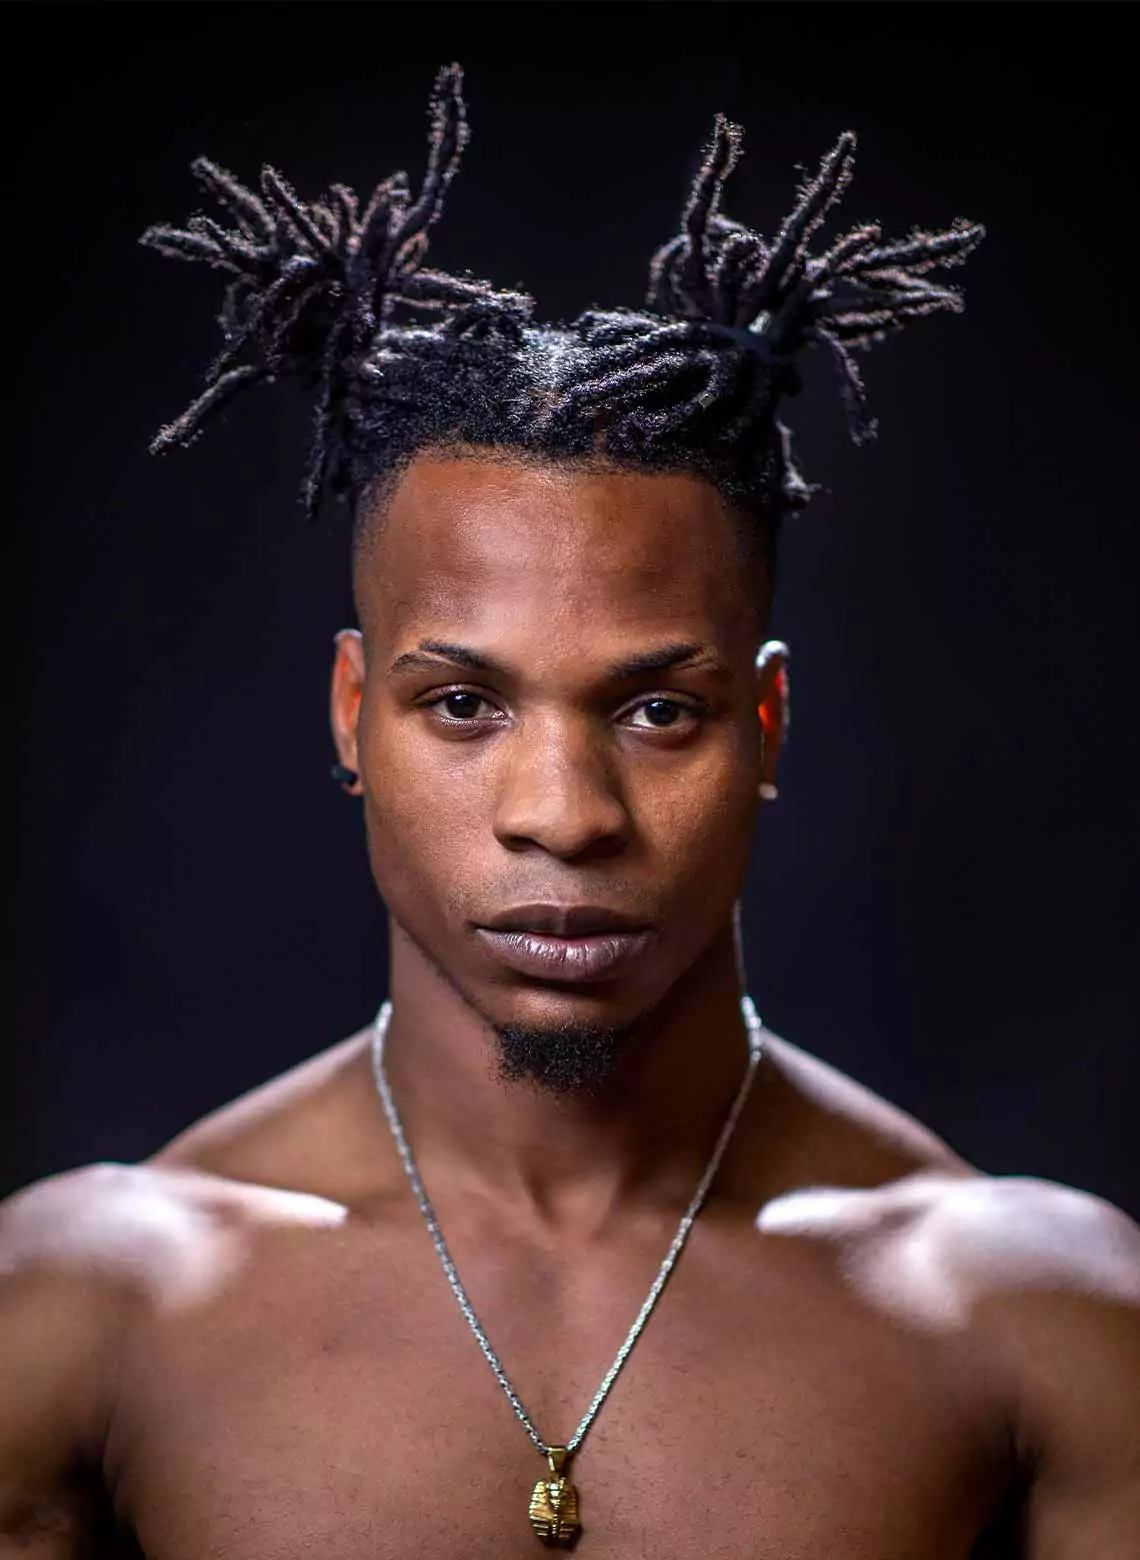 Image of man with locs in space buns. 